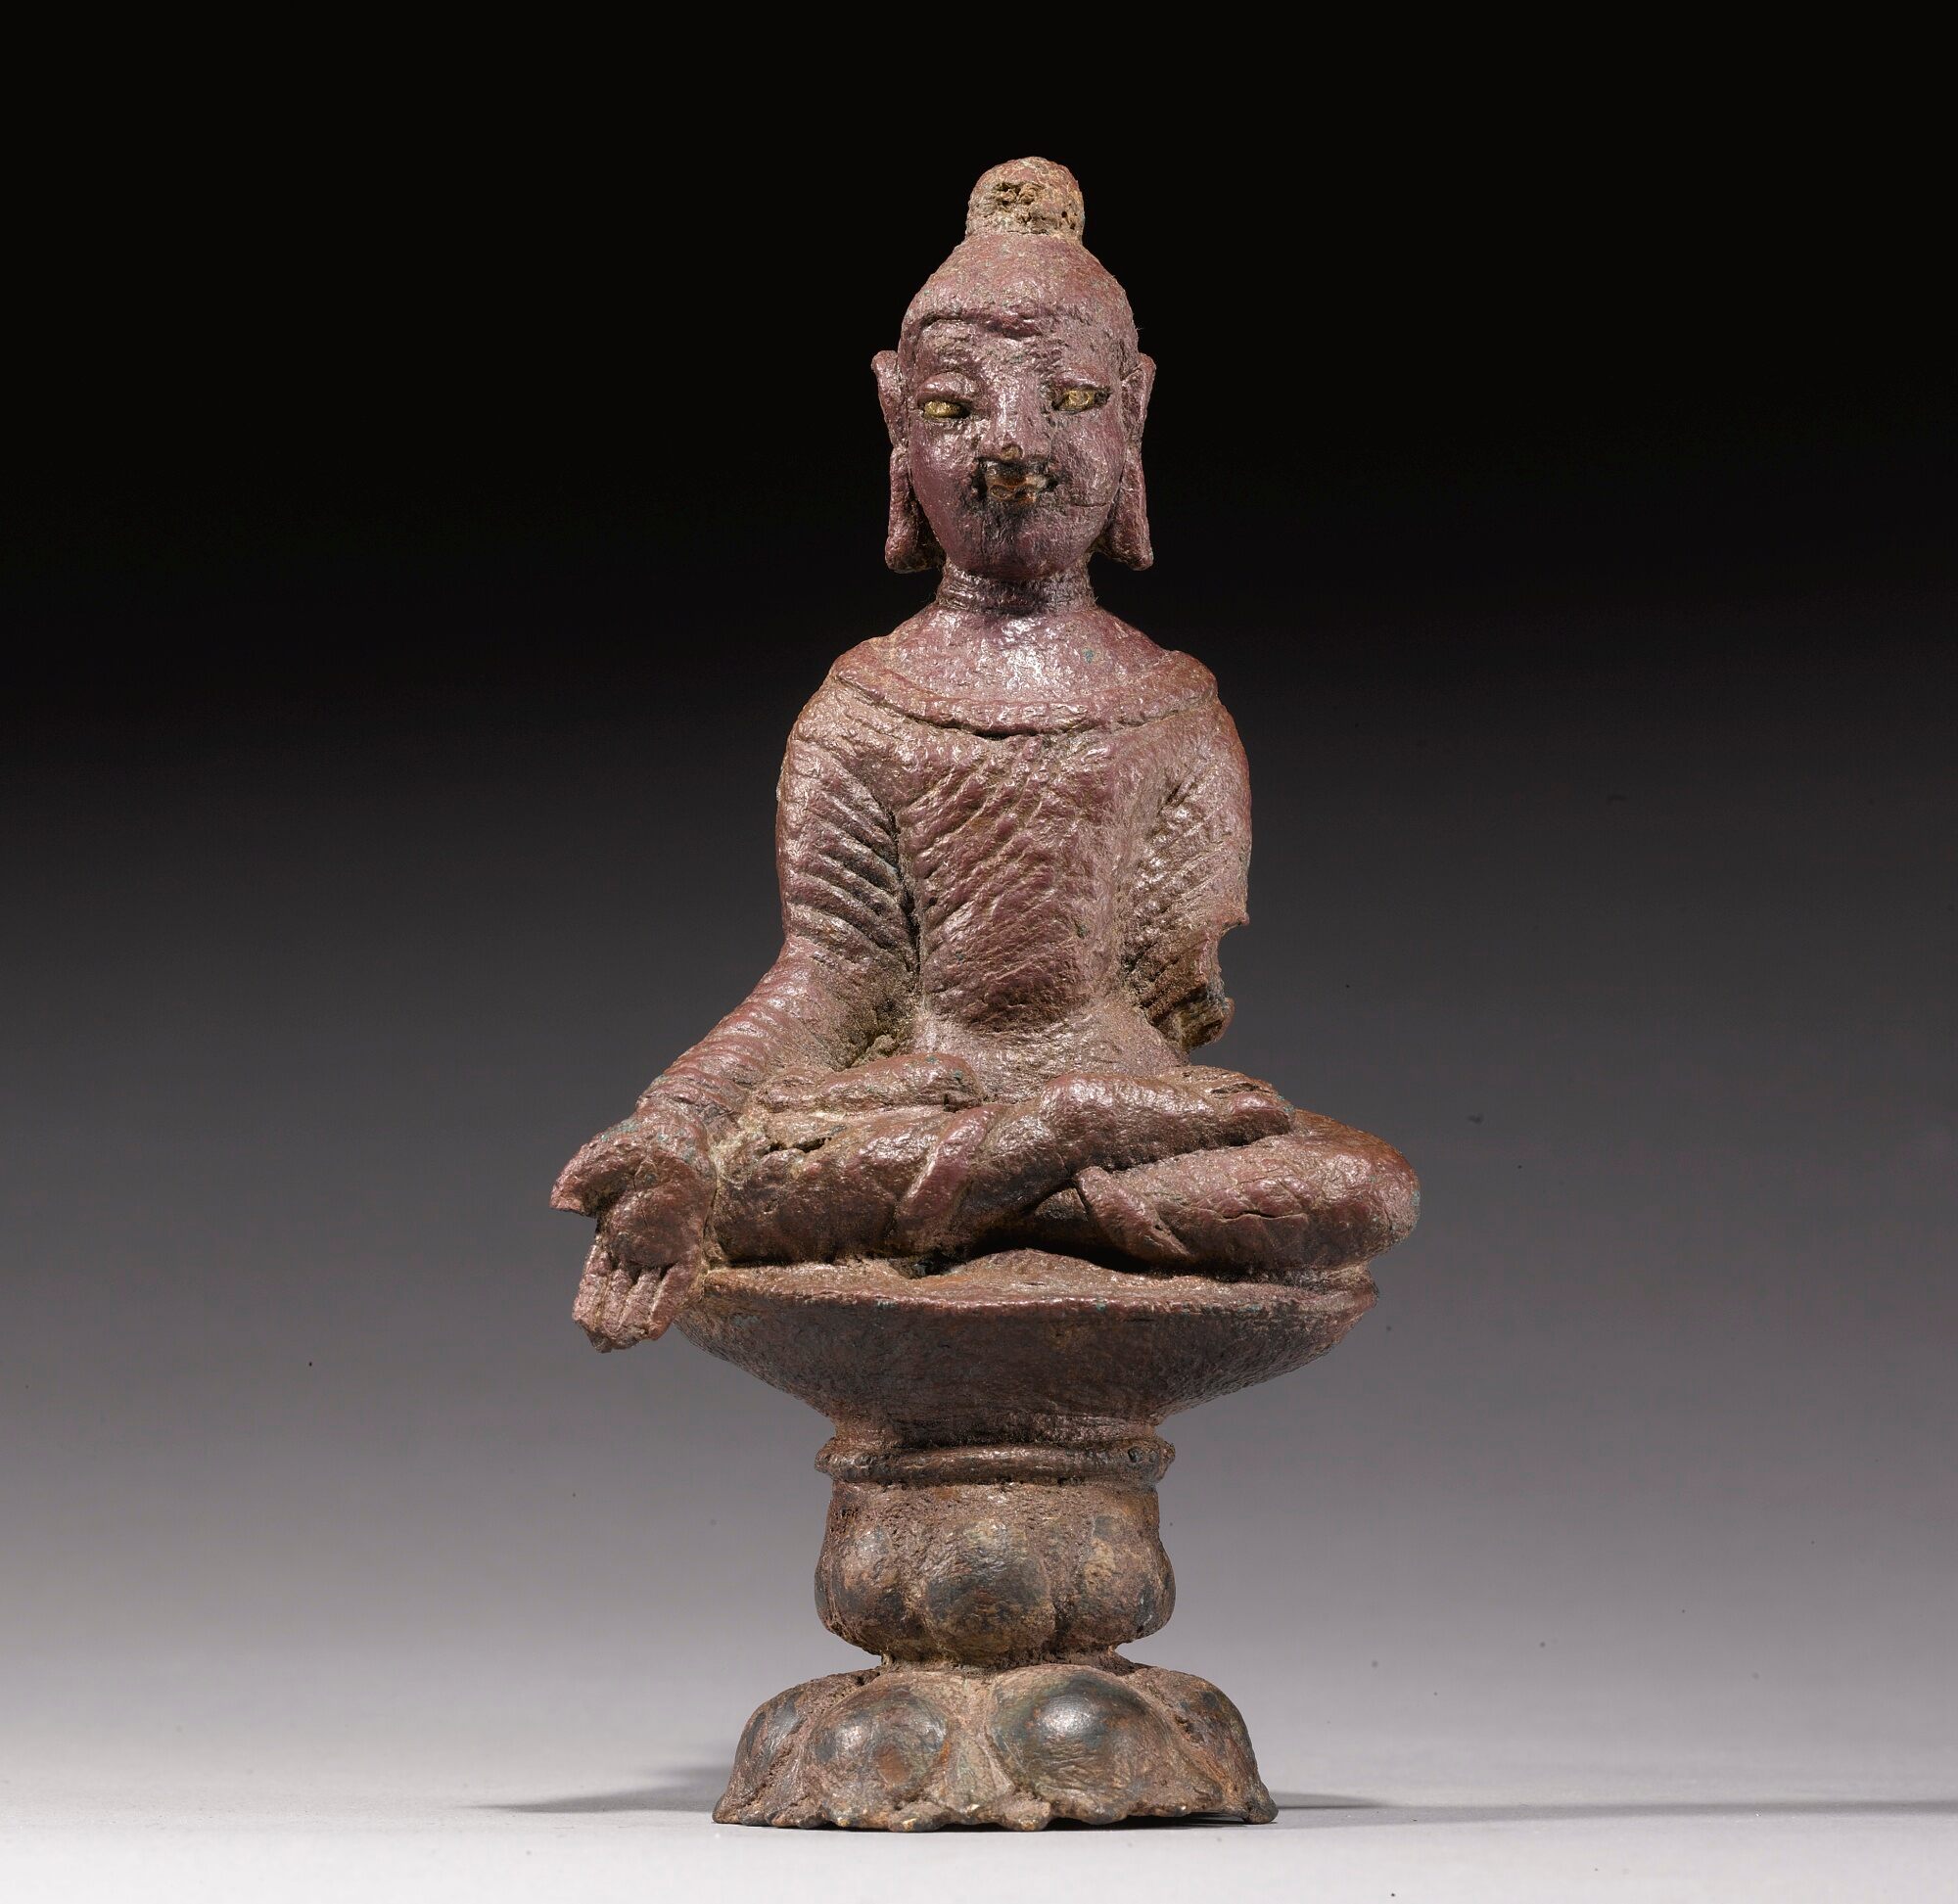 A COPPER ALLOY FIGURE OF SEATED BUDDHA Swat Valley, 6th/7th Century